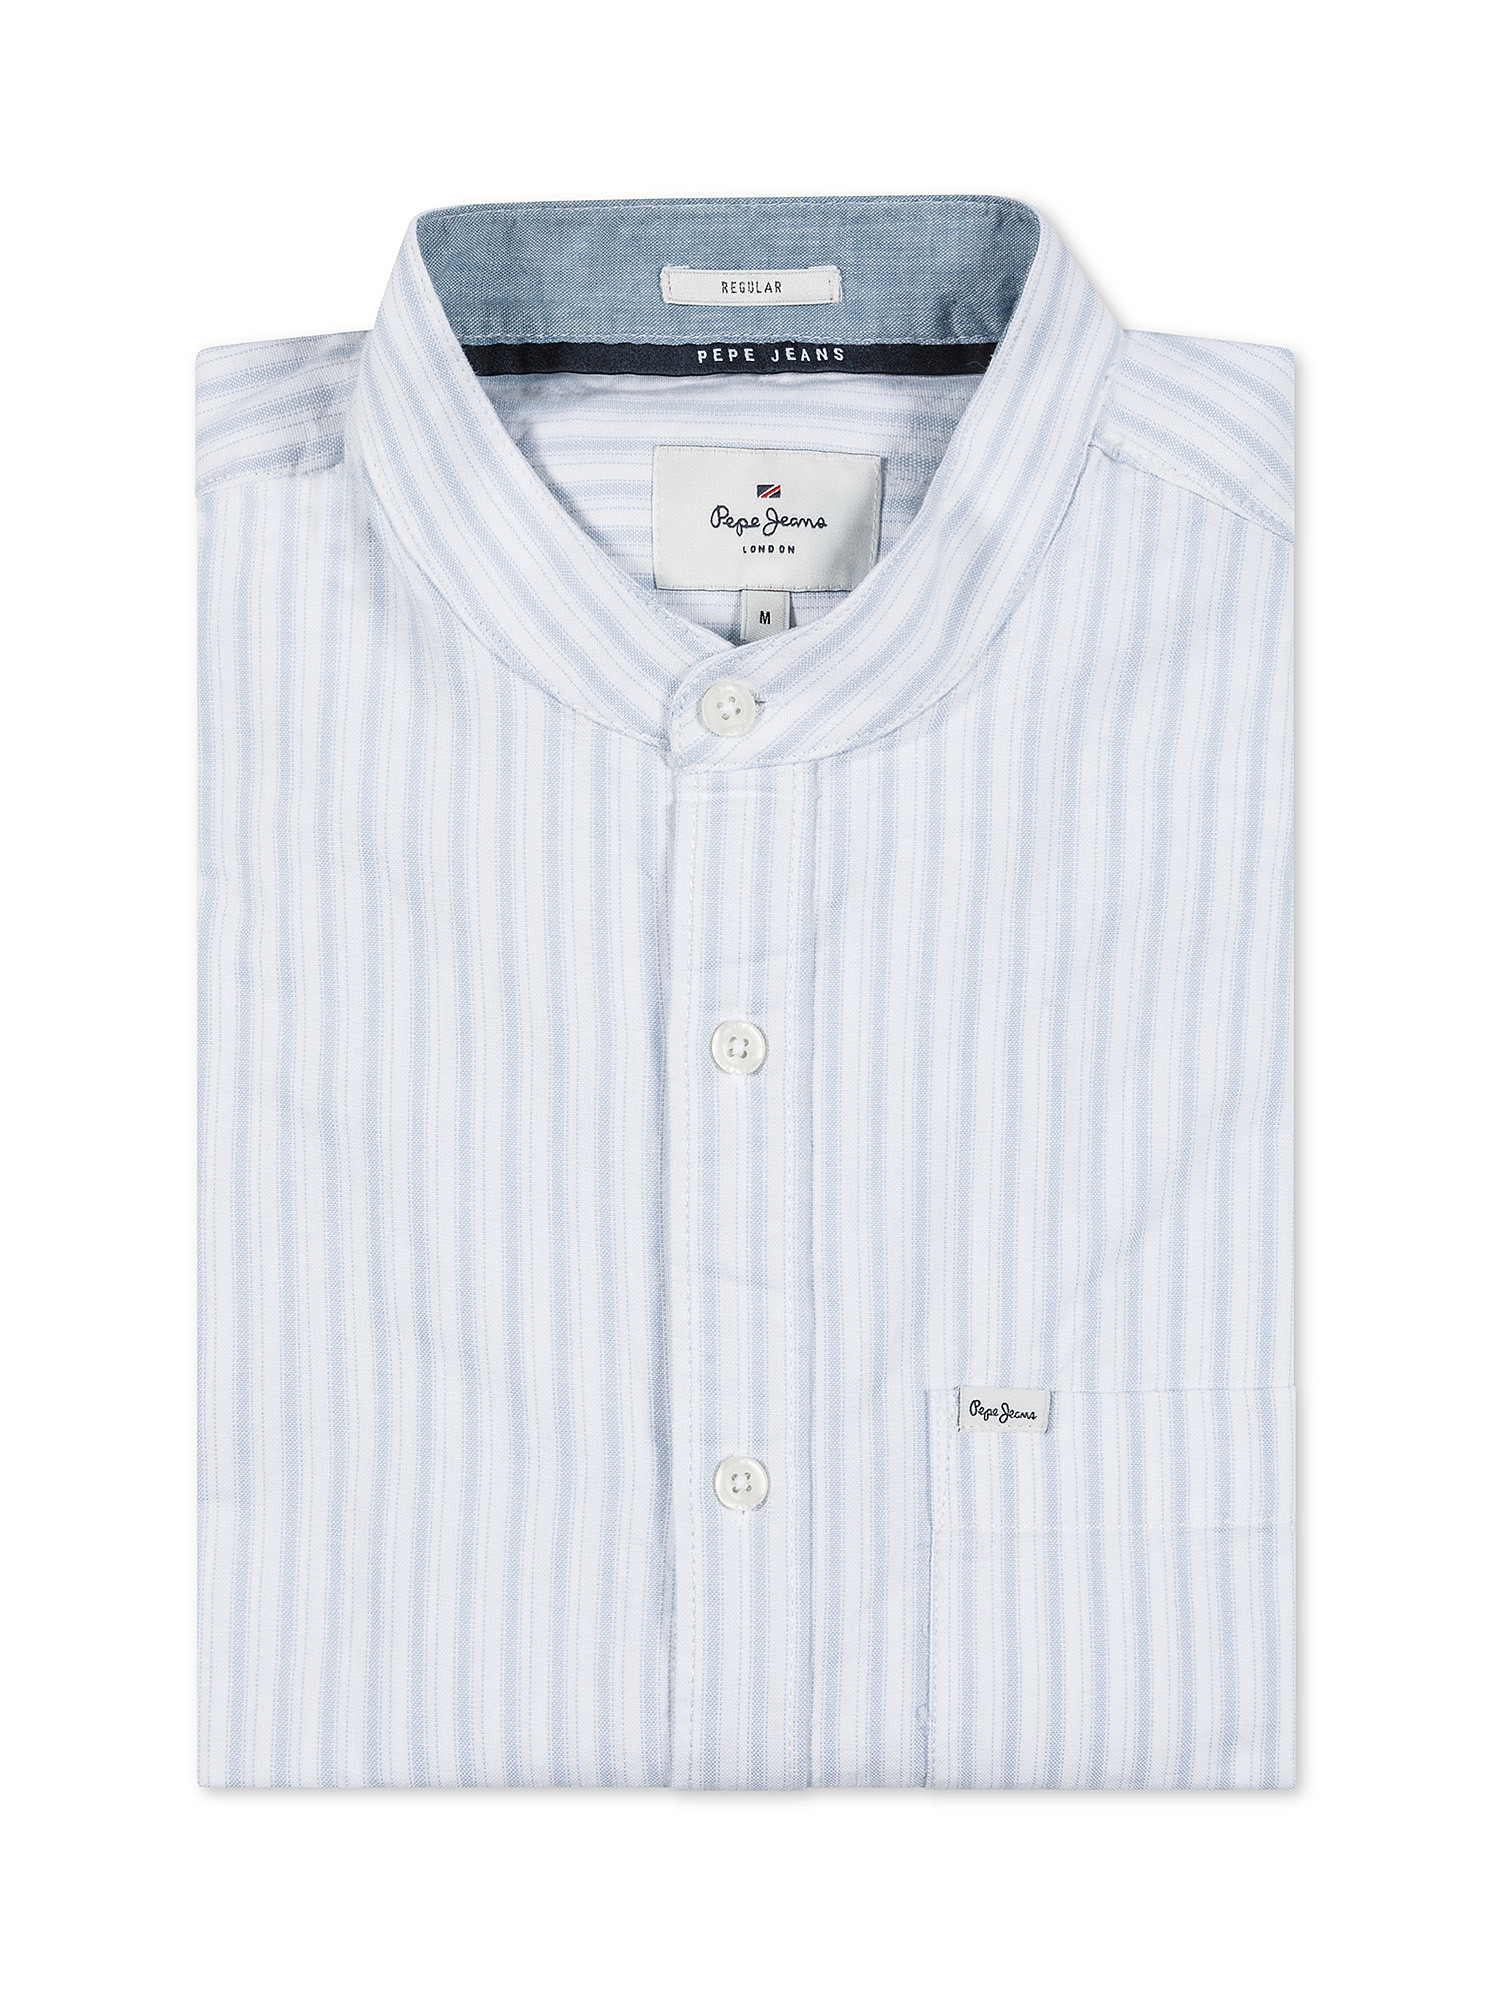 Pepe Jeans - Camicia a righe regular fit, Bianco, large image number 0